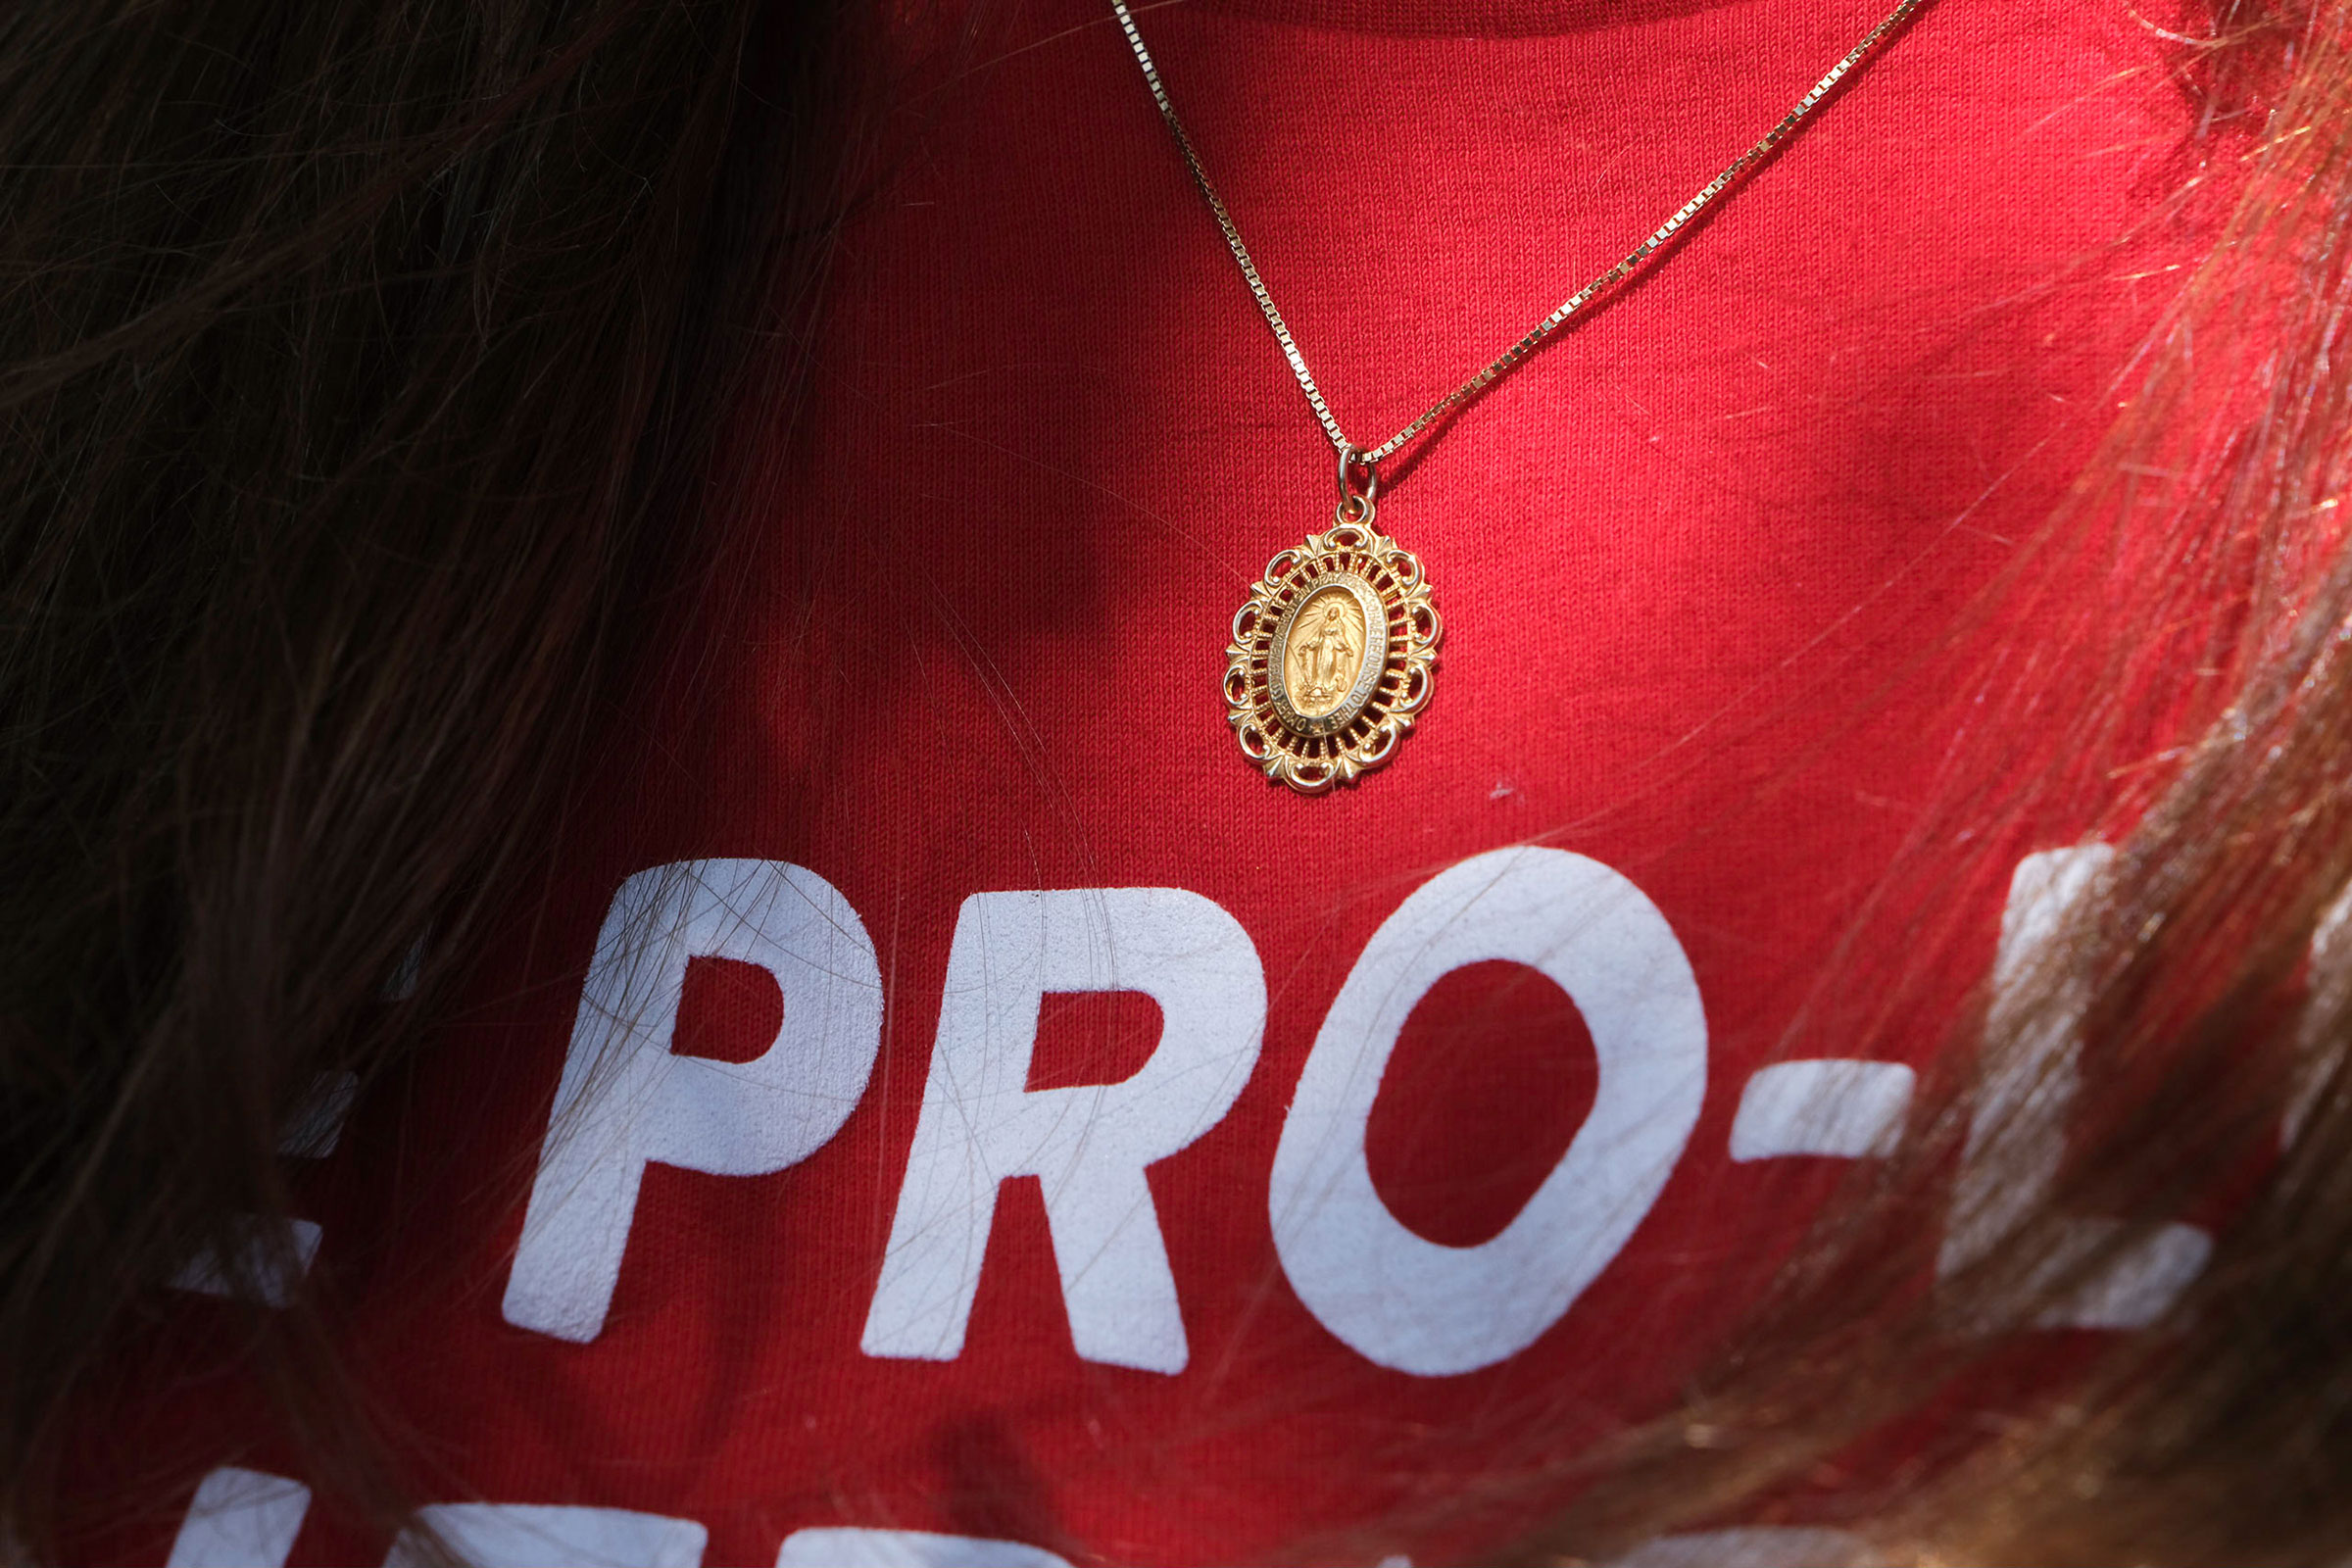 A member of Students for Life wears a Miraculous Medal pendant and pro-life t-shirt while canvassing in Overland Park, Kansas on July 23, 2022. Arin Yoon for TIME.